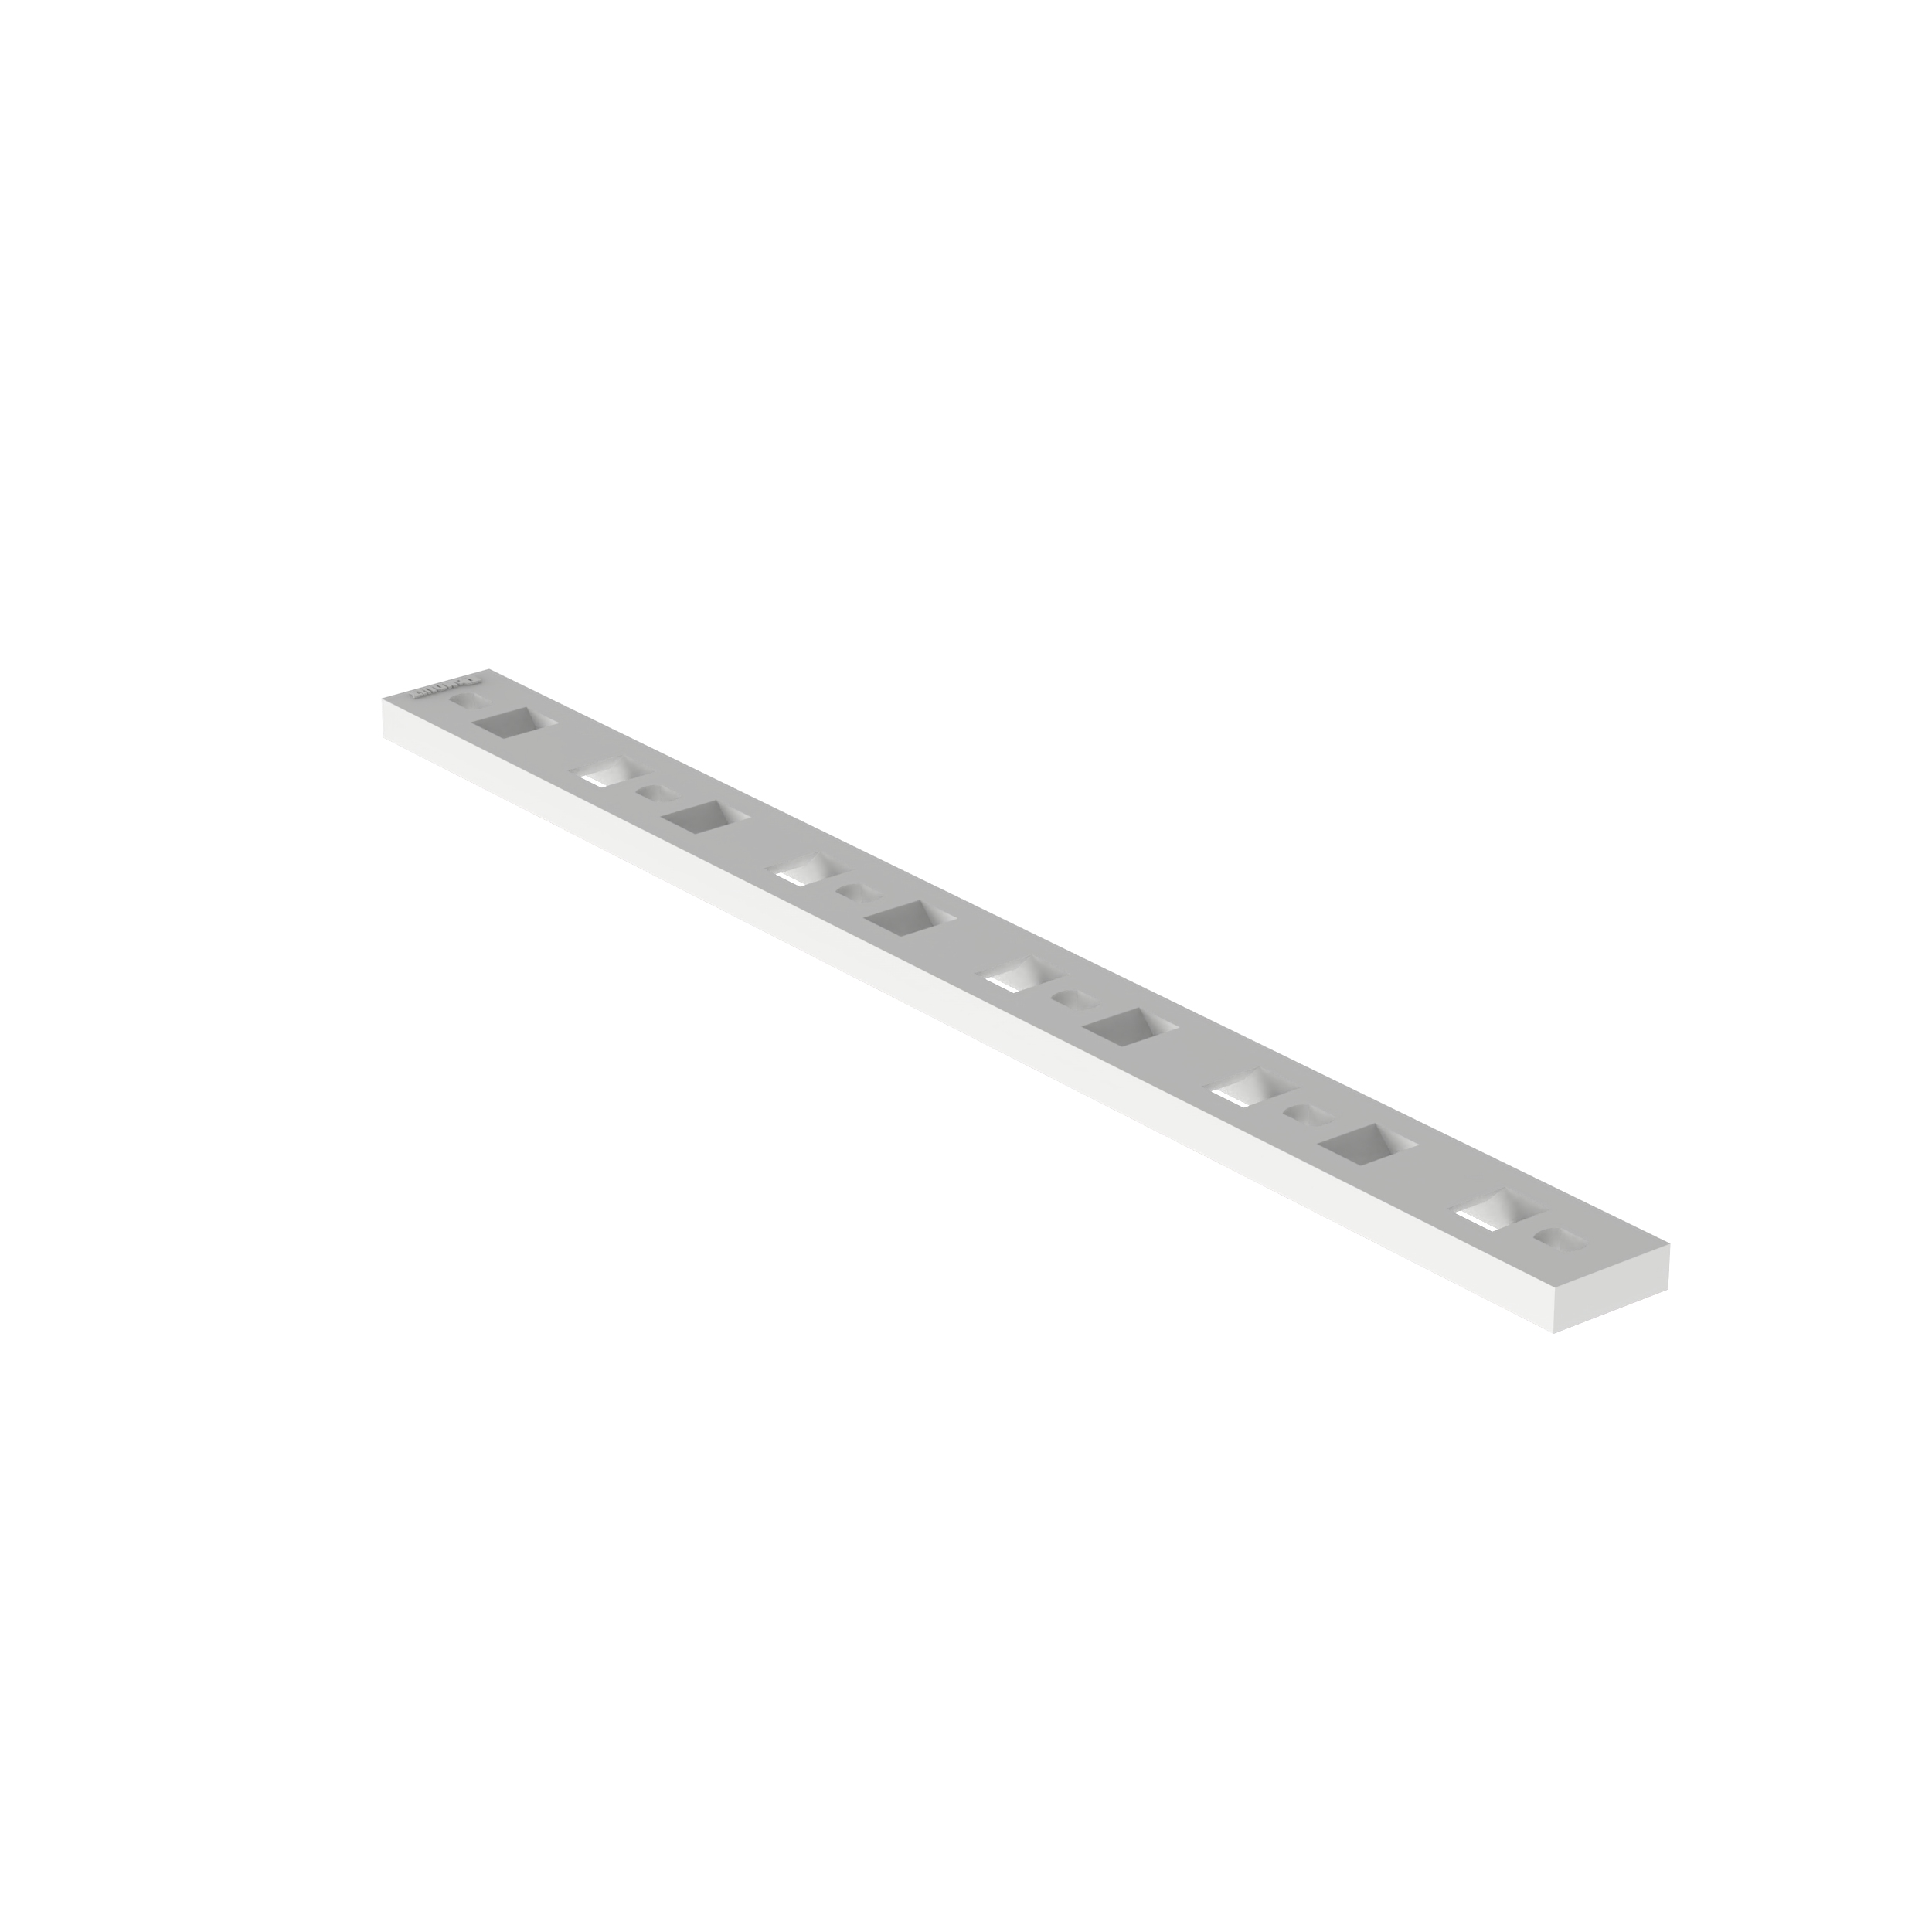 MTP5H-E6-C Tie Plate, Natural, PA 6.6, 8.09x0.62", #6 Screw, PK100